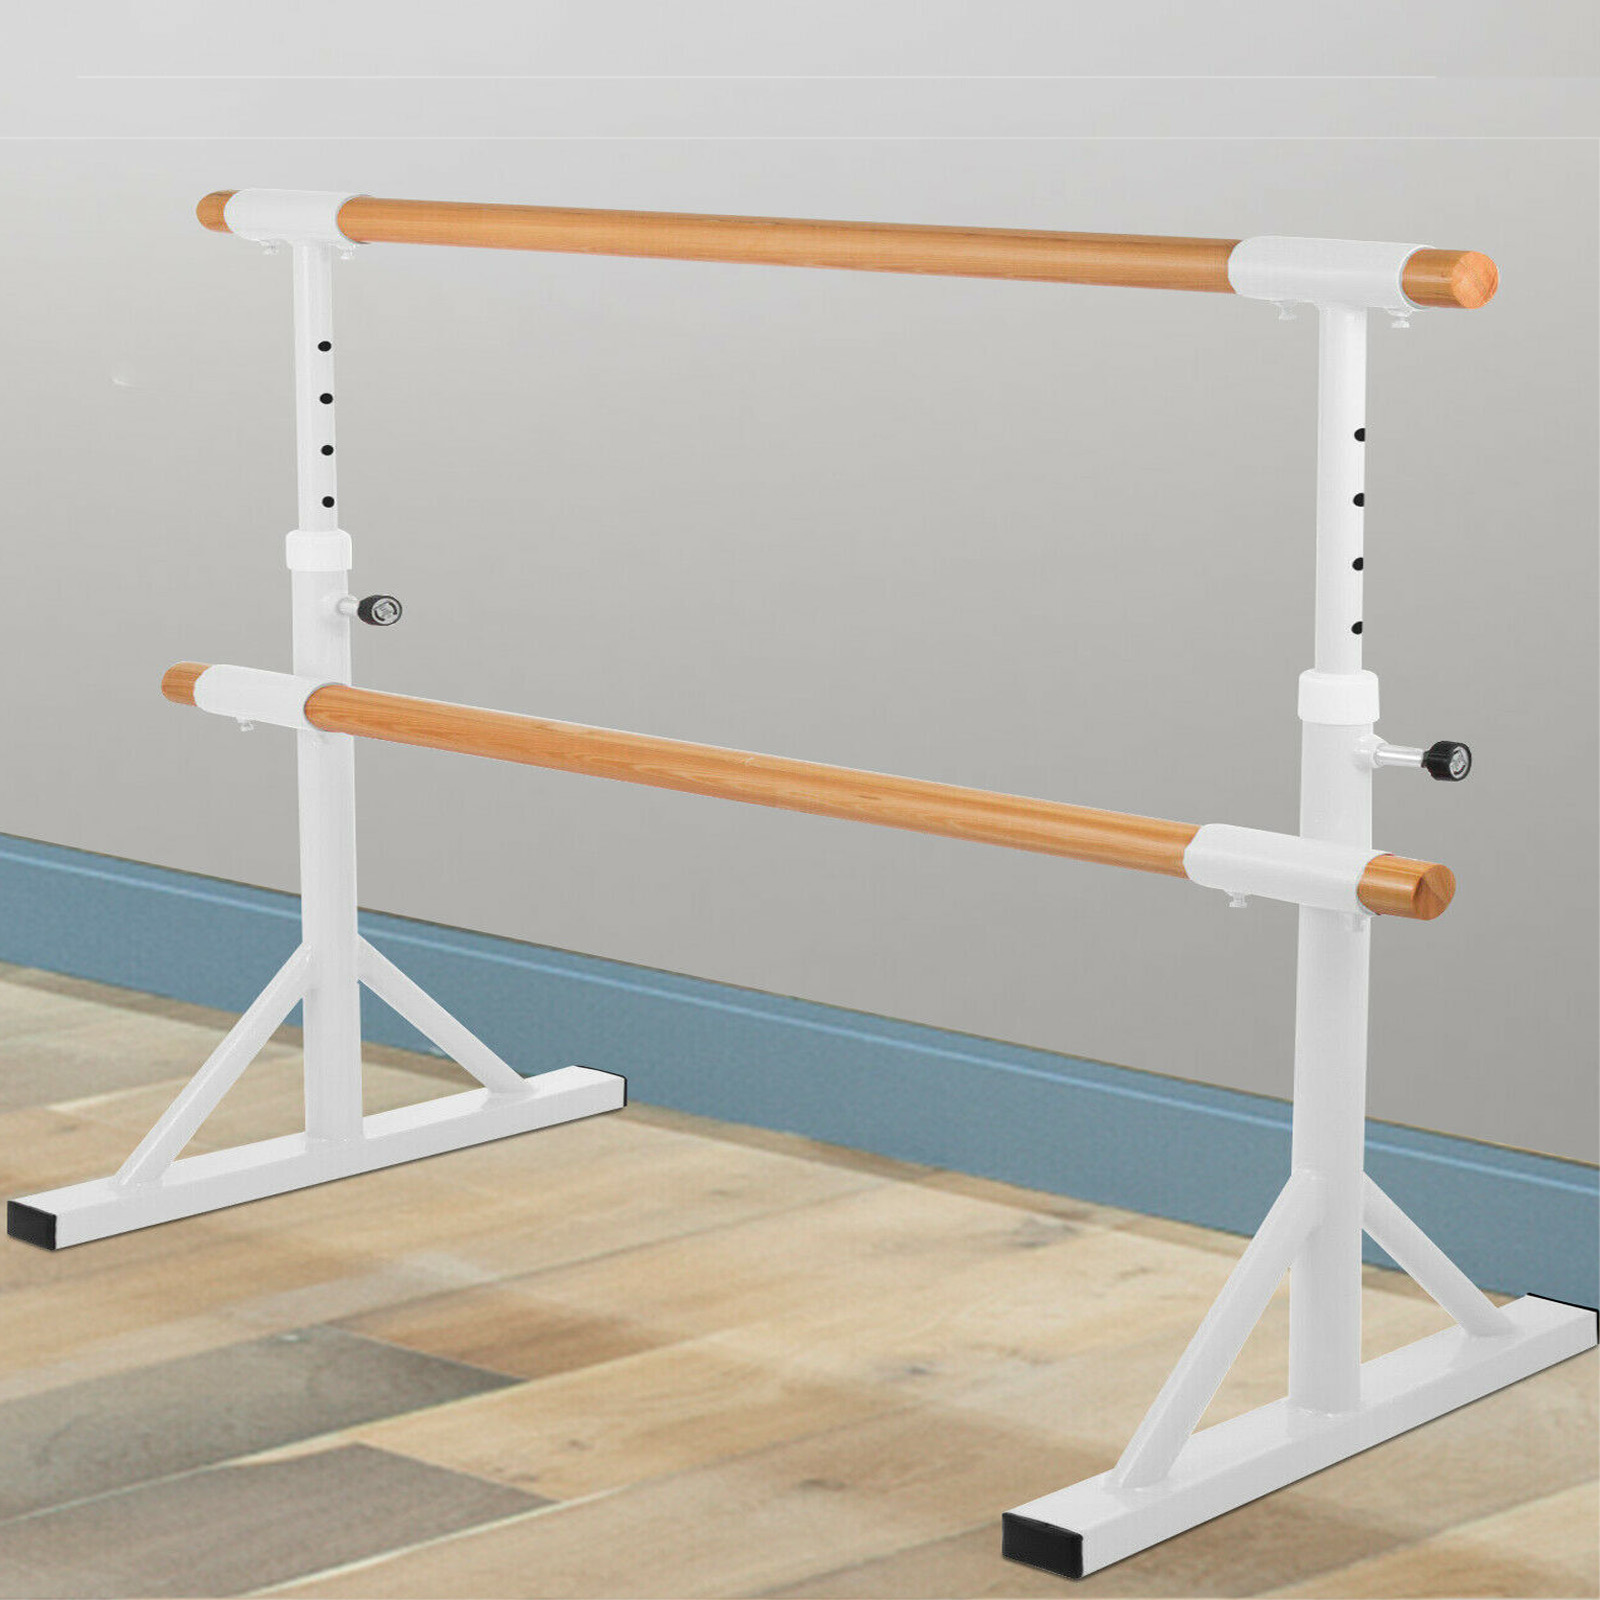 4ft Portable Double Freestanding Ballet Barre 29 Home Hight